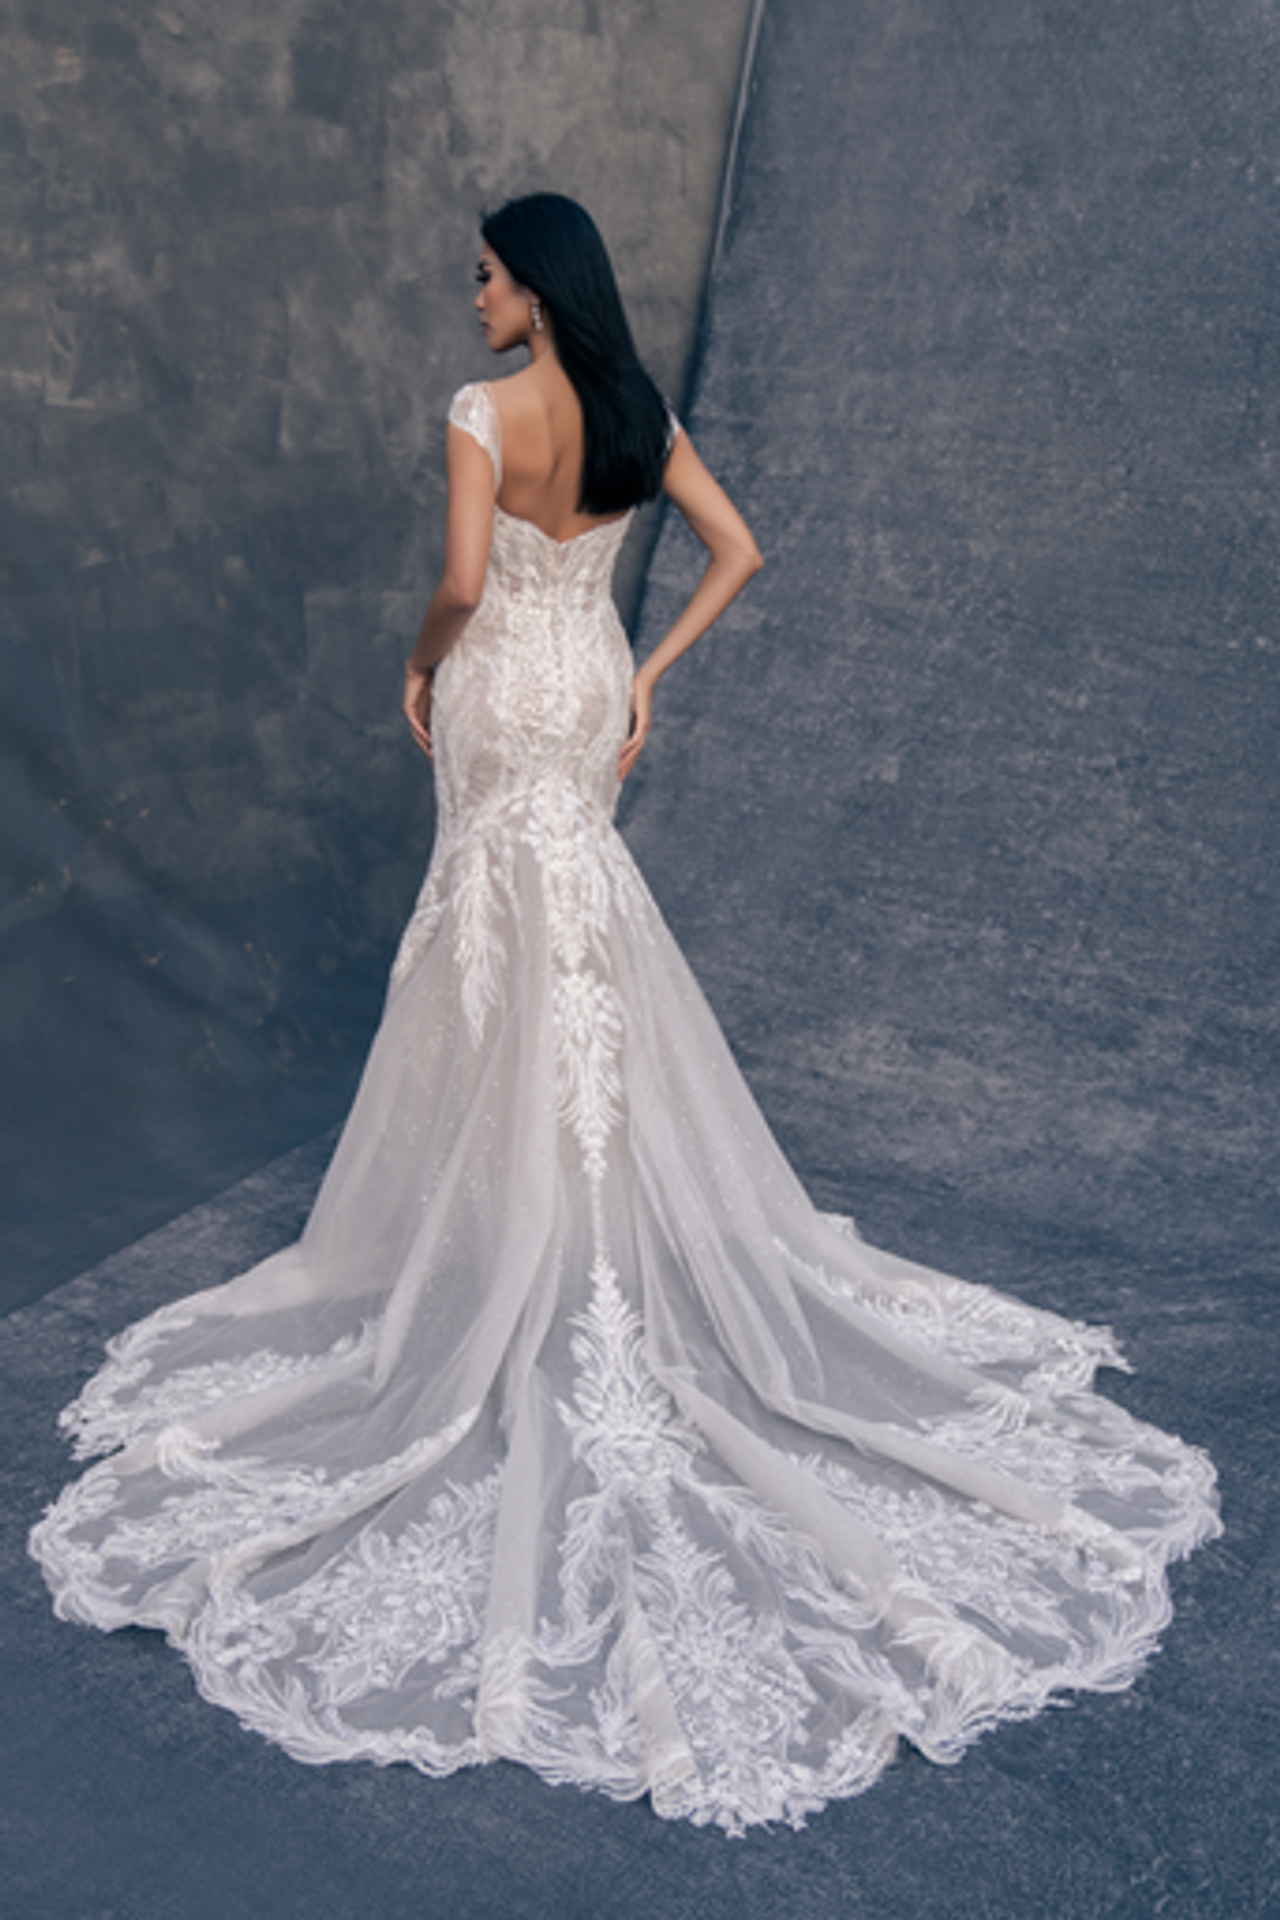 Romanic And Sexy Exposed Boning Fit And Flare Gown by Allure Bridals - Image 3